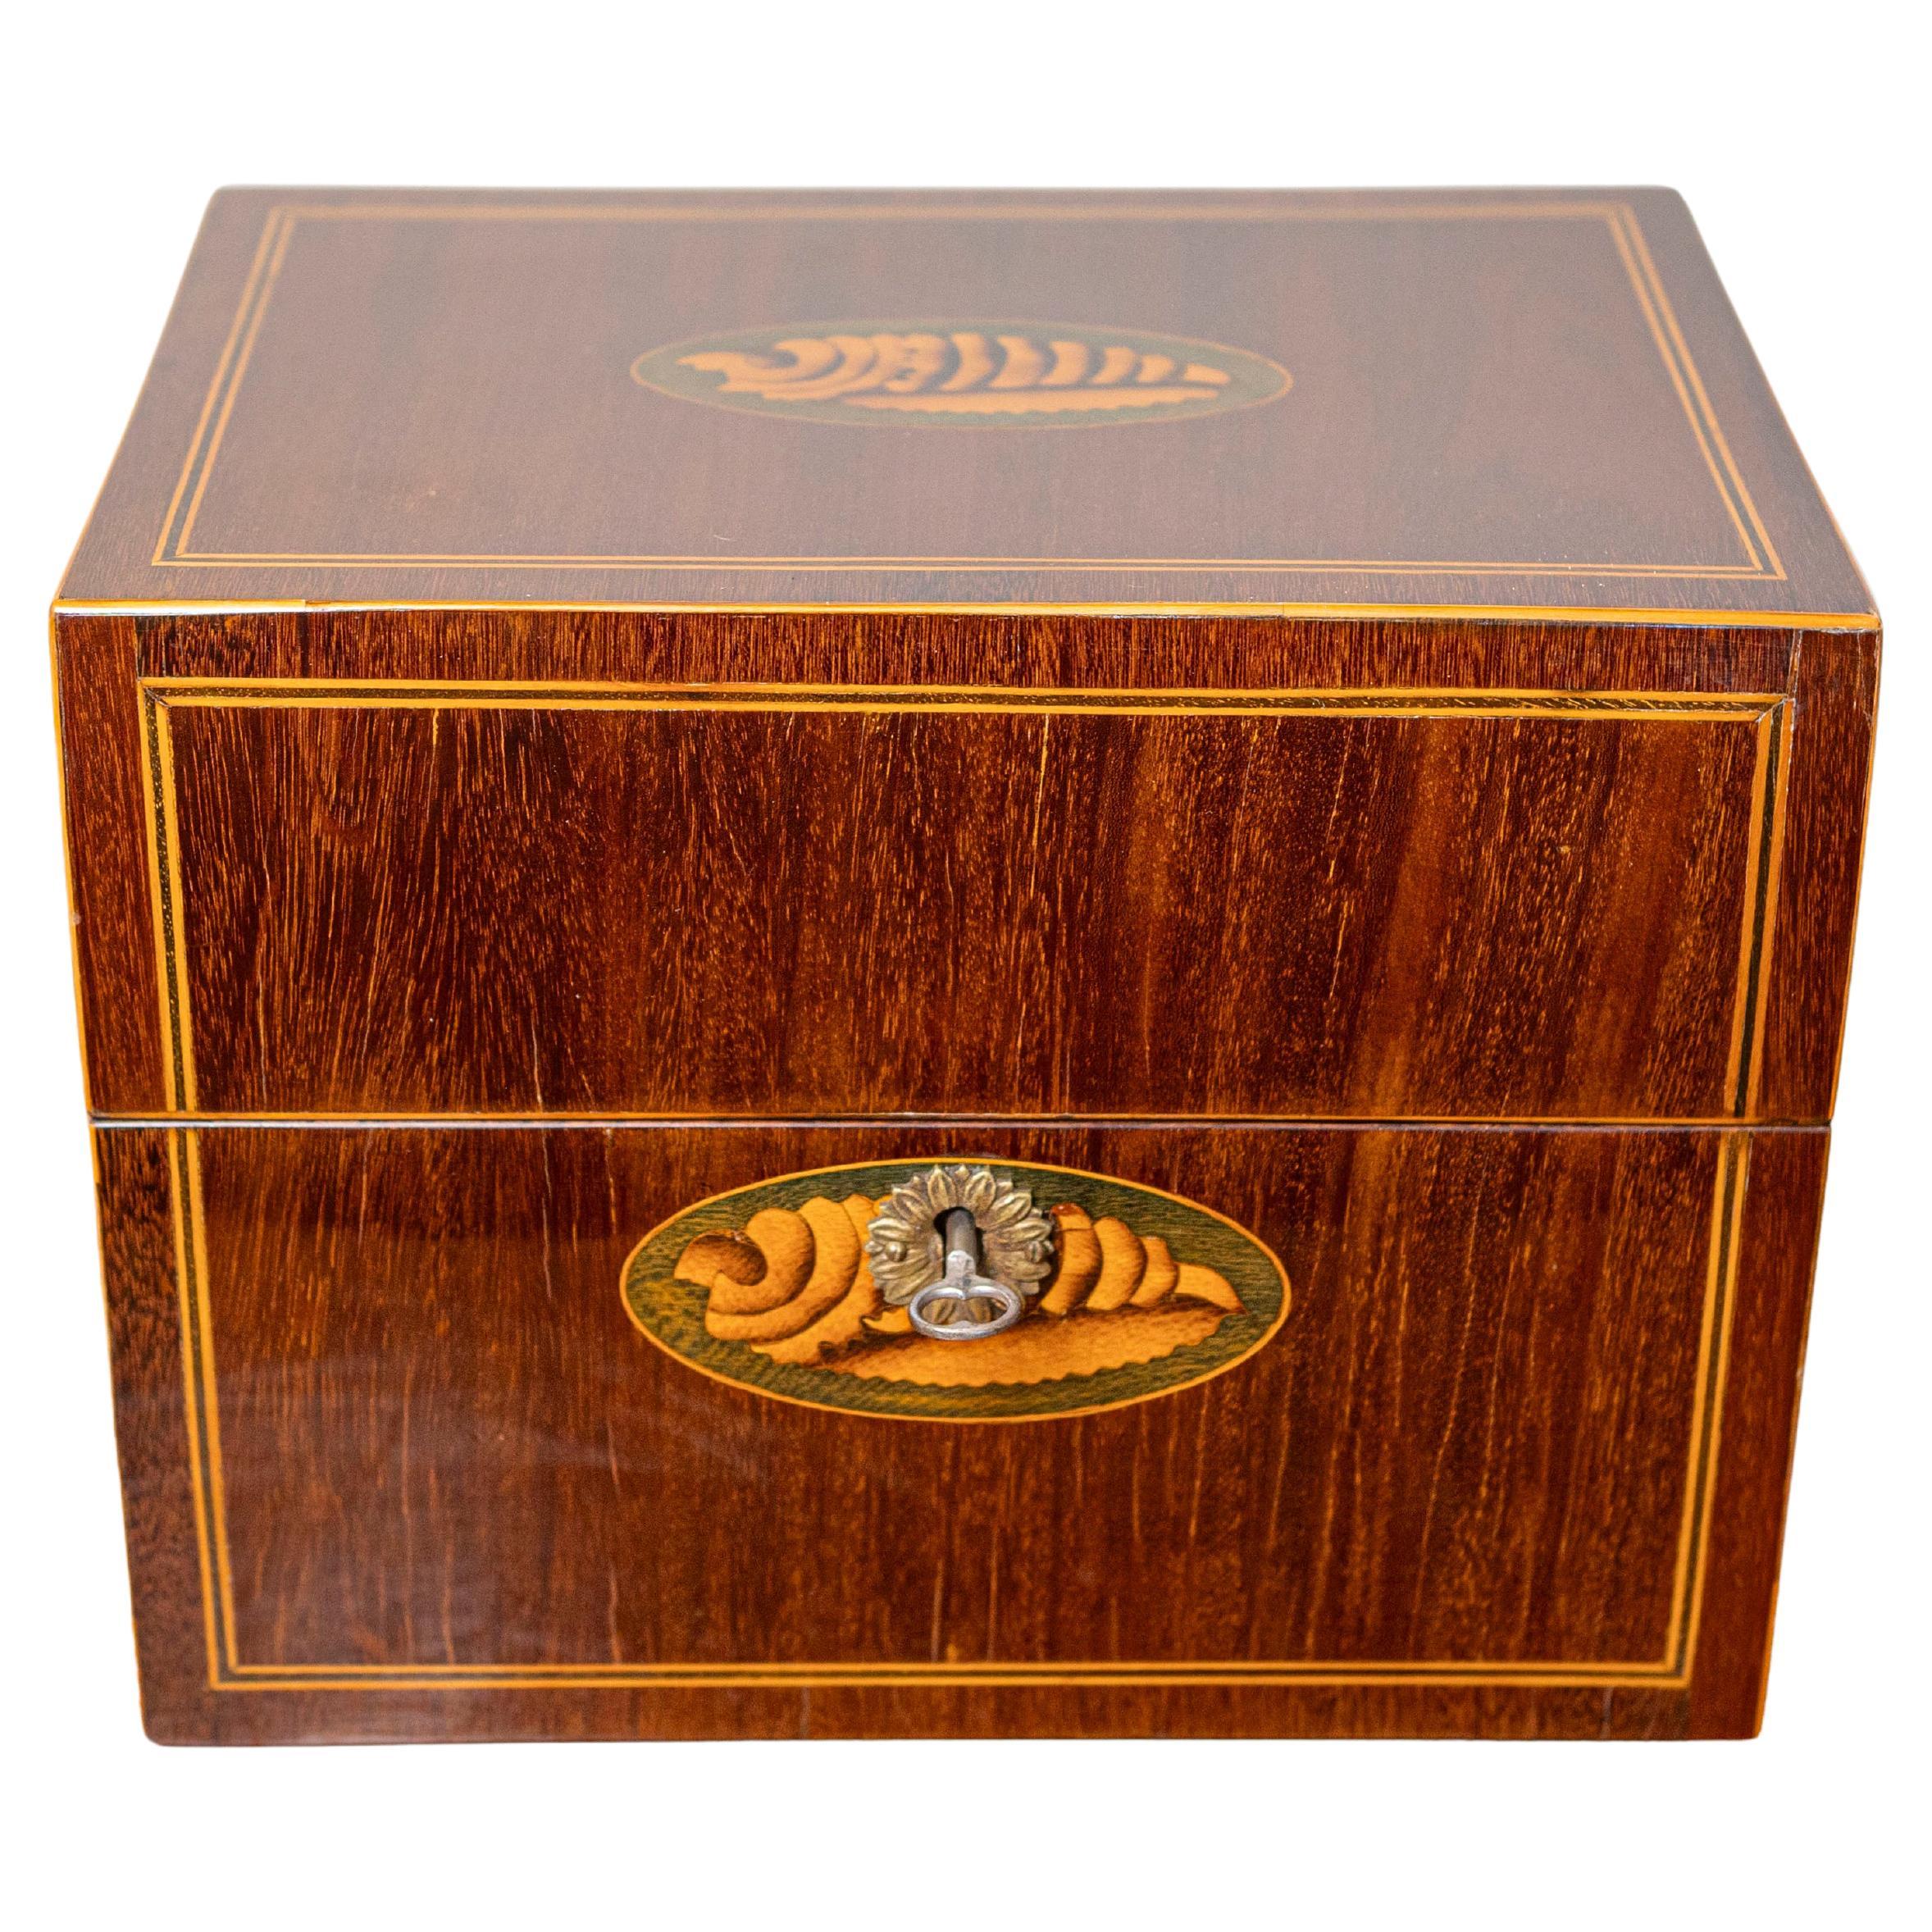 Danish 1840s Mahogany Box with Ash Shell Marquetry, Banding and Lateral Handles